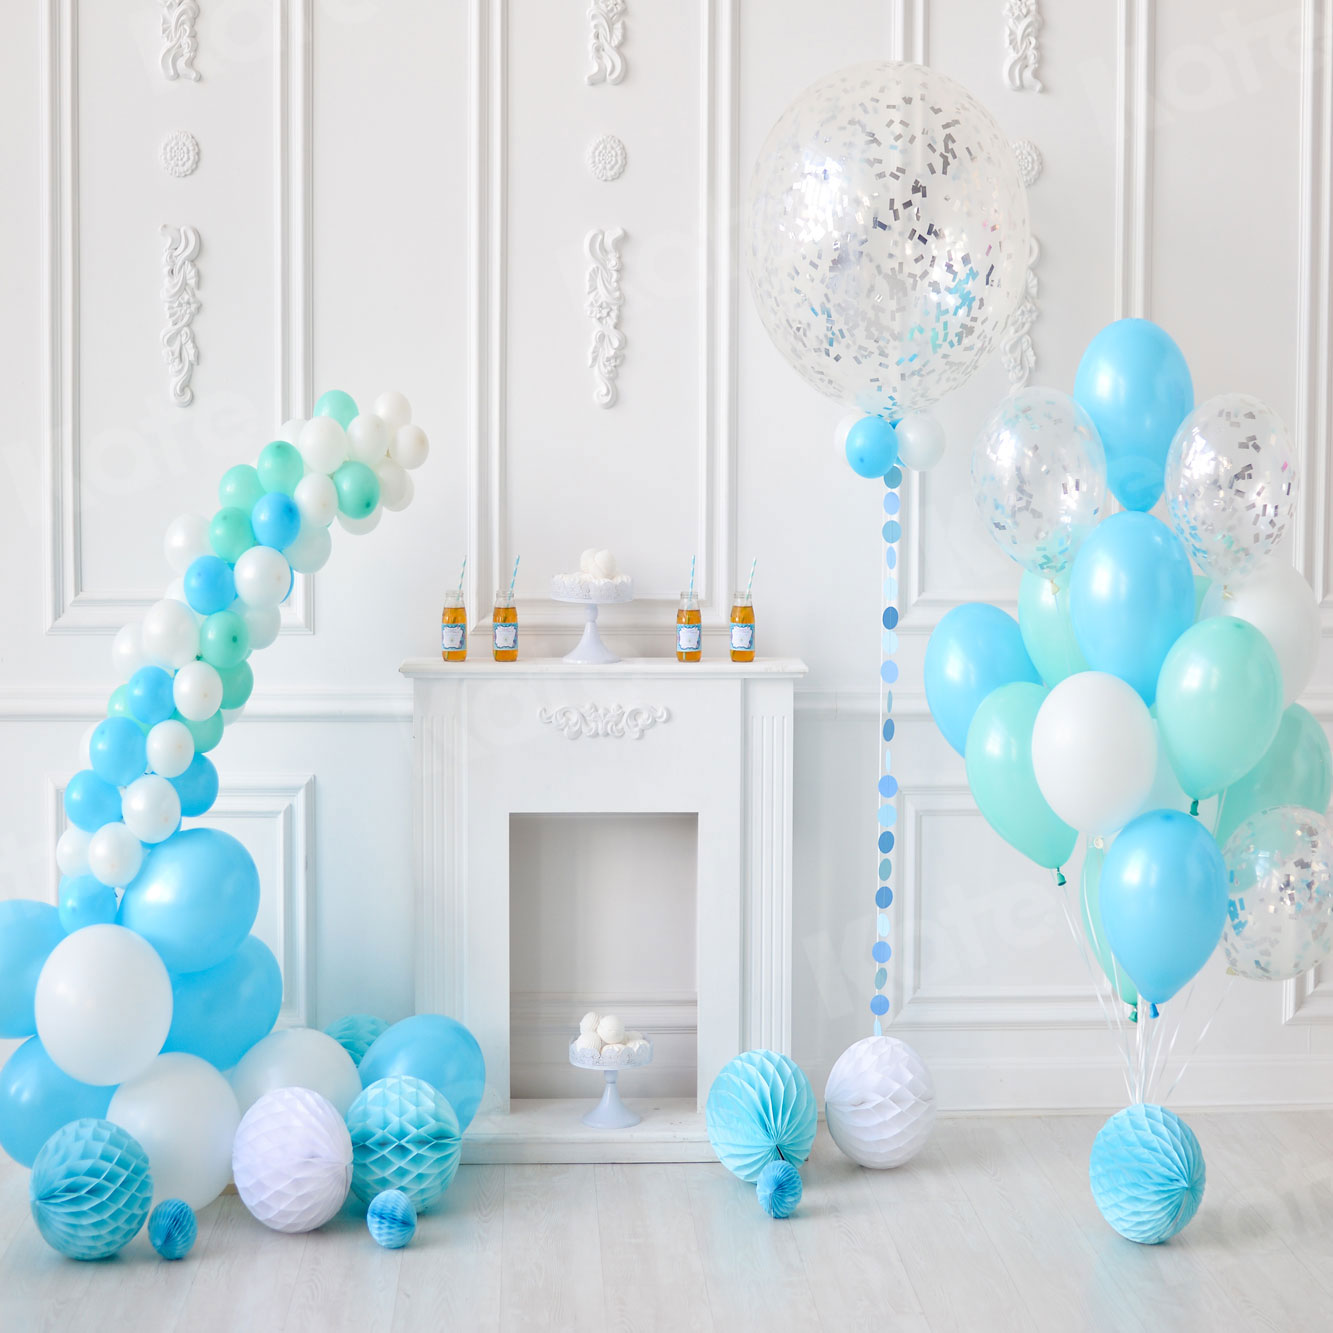 Kate White Wall with Balloons Birthday Backdrop for Photography